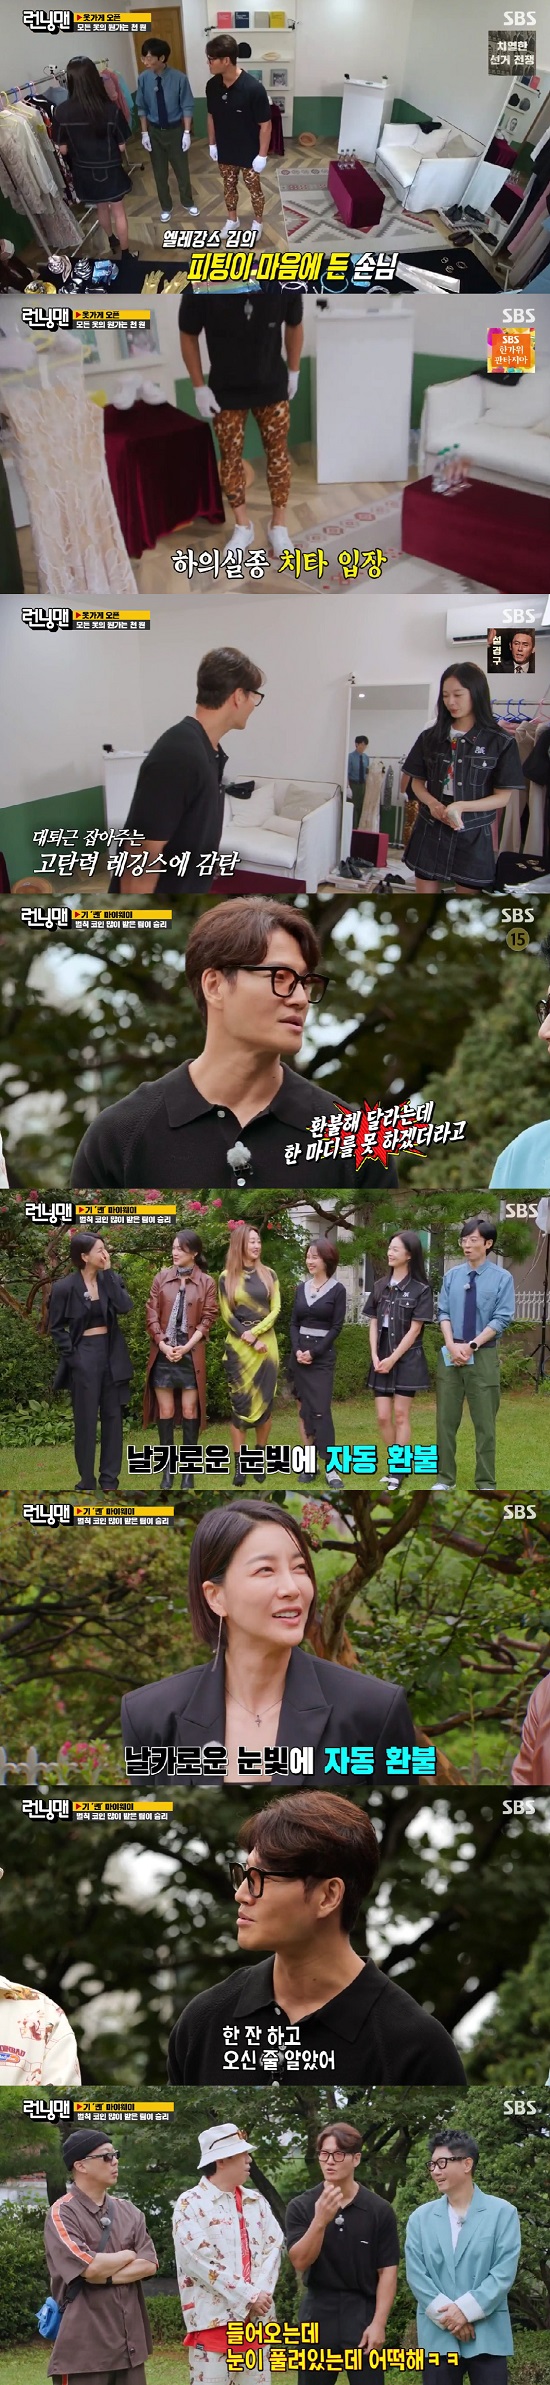 In the SBS entertainment program Running Man broadcasted on the 11th, Jin Seo-yeon, Ok Ja-yeon and Choi Ji-jin appeared and Gi My Way Race was broadcast.On this day, Jeon So-min found a luxury multi-shop run by Yoo Jae-Suk and Kim Jong-kook.Kim Jong-kook even showed off Hopi Reservation pattern leggings fittings to sell clothes to Jeon So-min.Kim Jong-kook recommended purchasing clothes after fitting, saying, It is so beautiful to wear it as a missing person.Jeon So-min was satisfied and bought 300,000 won worth of goods, and then Jin Seo-yeon appeared as all refunds.Jeon So-min continued the situation drama, saying Im confused by Sister.When Jin Seo-yeon asked for a refund, Kim Jong-kook laughed, saying, Im sorry, did you drink Sister?Yoo Jae-Suk asked, What do you refund for? and Jin Seo-yeon said, This fabric can not be this amount.Yoo Jae-Suk then said, We sell it cheaply and we gave you how much service. Its our loss.Jin Seo-yeon poured out the clothes in the shopping bag, saying, Shall we see it once?This is Dongdaemun 20,000 won, this is Namdaemun 18,000 won, said Jeon So-min, who bought clothes at an absurdly expensive price.So, Jeon So-min said, I want to wear this.Jin Seo-yeon laughed, saying, You want to wear this at the club? And added, If you wear this, you can not wear it.I want you to refund me anyway. Now, Somin is stuck in these good-looking men, he said, I do not meet a mans body.Jin Seo-yeon, who succeeded in refunding, told the members, We have received a lot of refunds.Kim Jong-kook said, I asked for a refund, but I could not say a word. He also added, I thought you had a drink.I couldnt look at my eyes, agreed Jeon So-min.I have a strong eye, said Yoo Jae-Suk, but you came and the comment was not normal.Yang Se-chan asked, How hard did you get scared? Kim Jong-kook replied, What do you do when your eyes are released?Photo: SBS broadcast screen